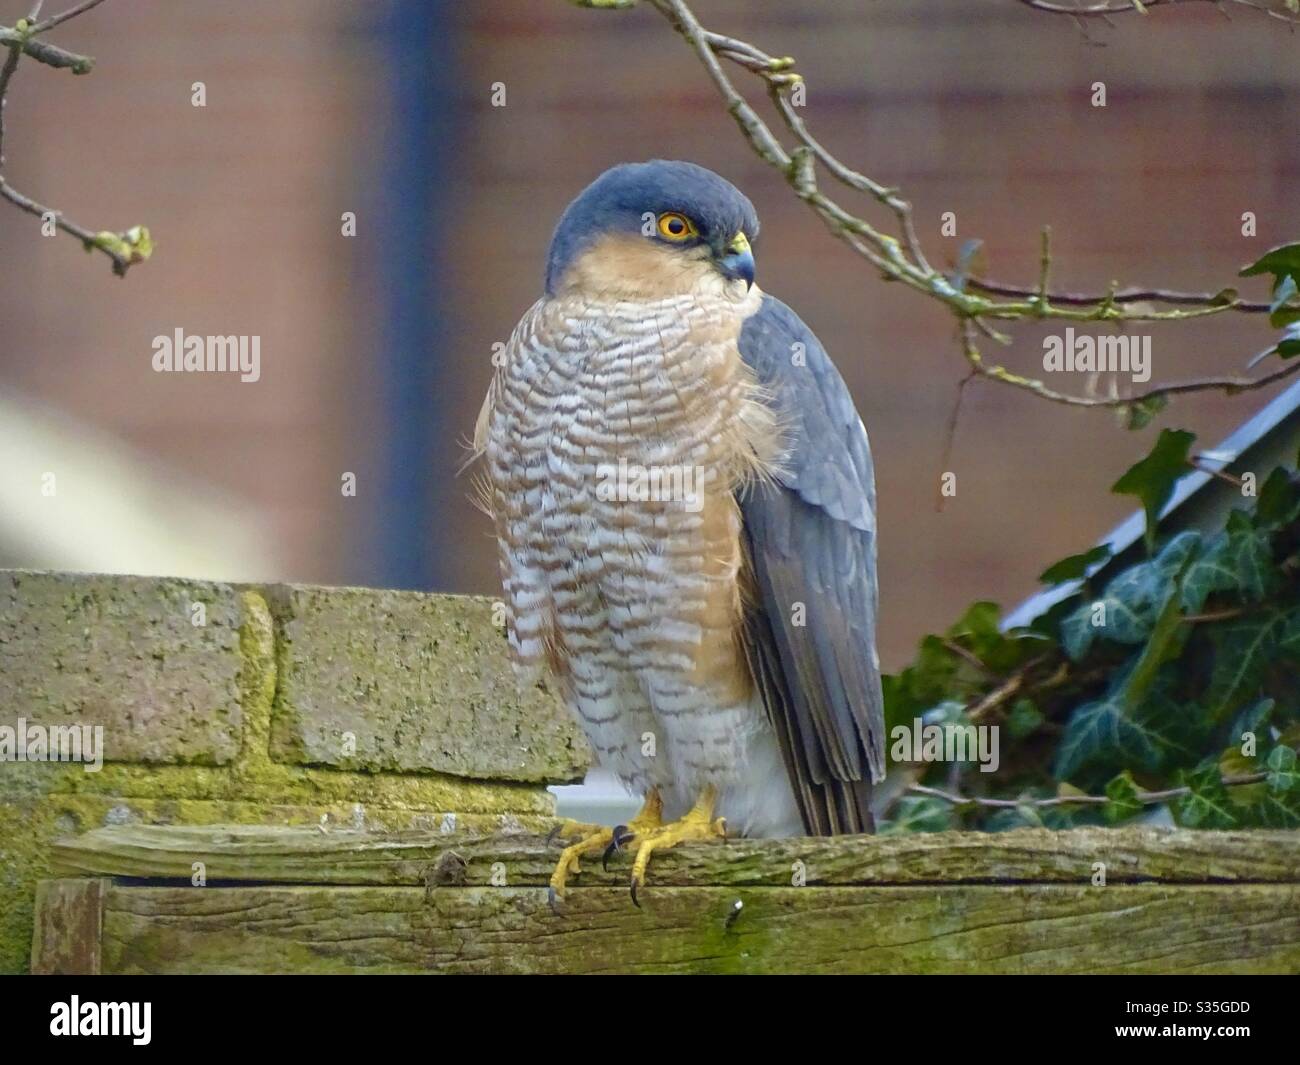 Beautiful Sparrowhawk perched on a garden fence Stock Photo